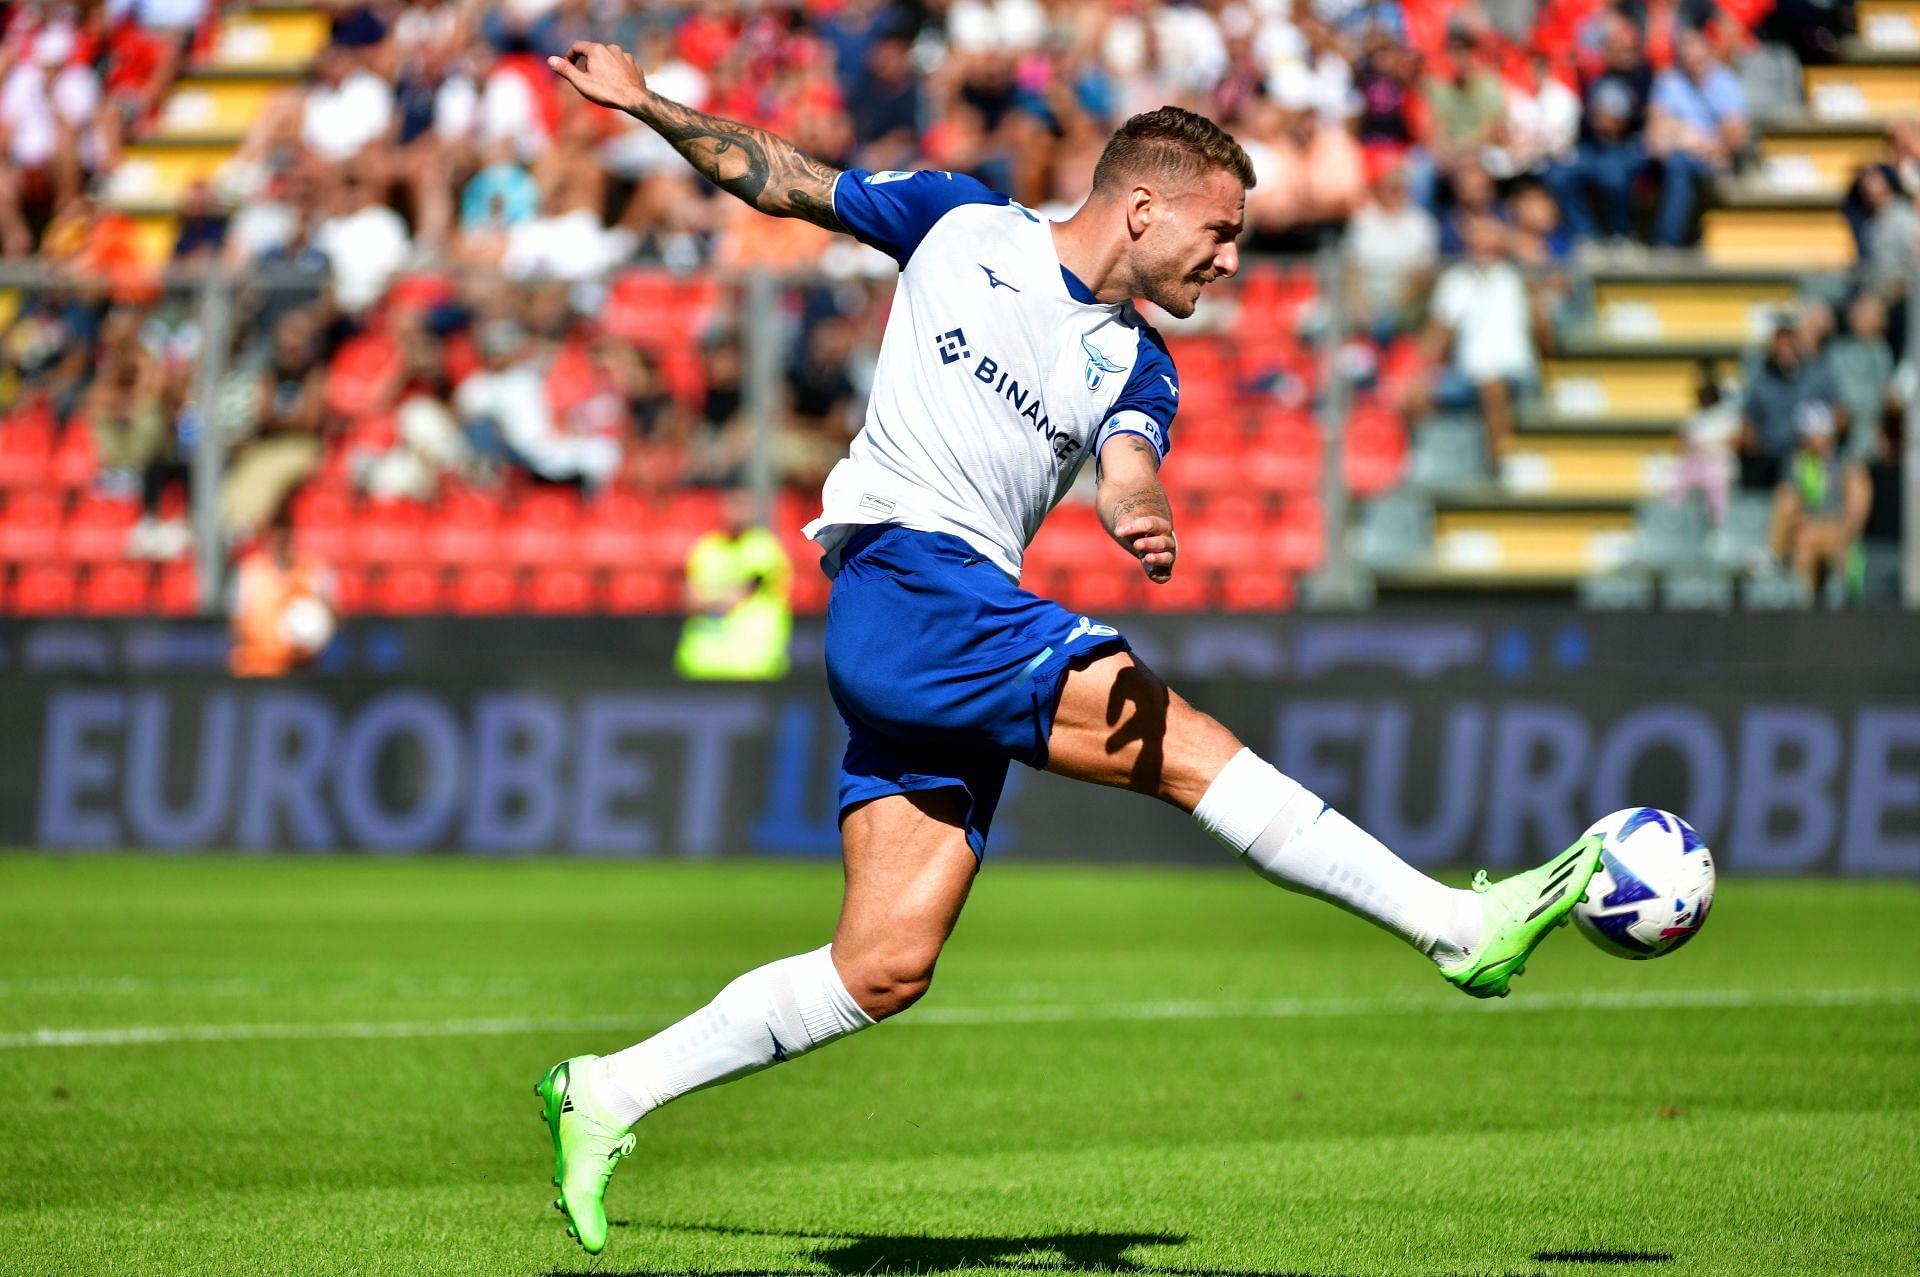 Immobile has been impressive in front of goal for Lazio